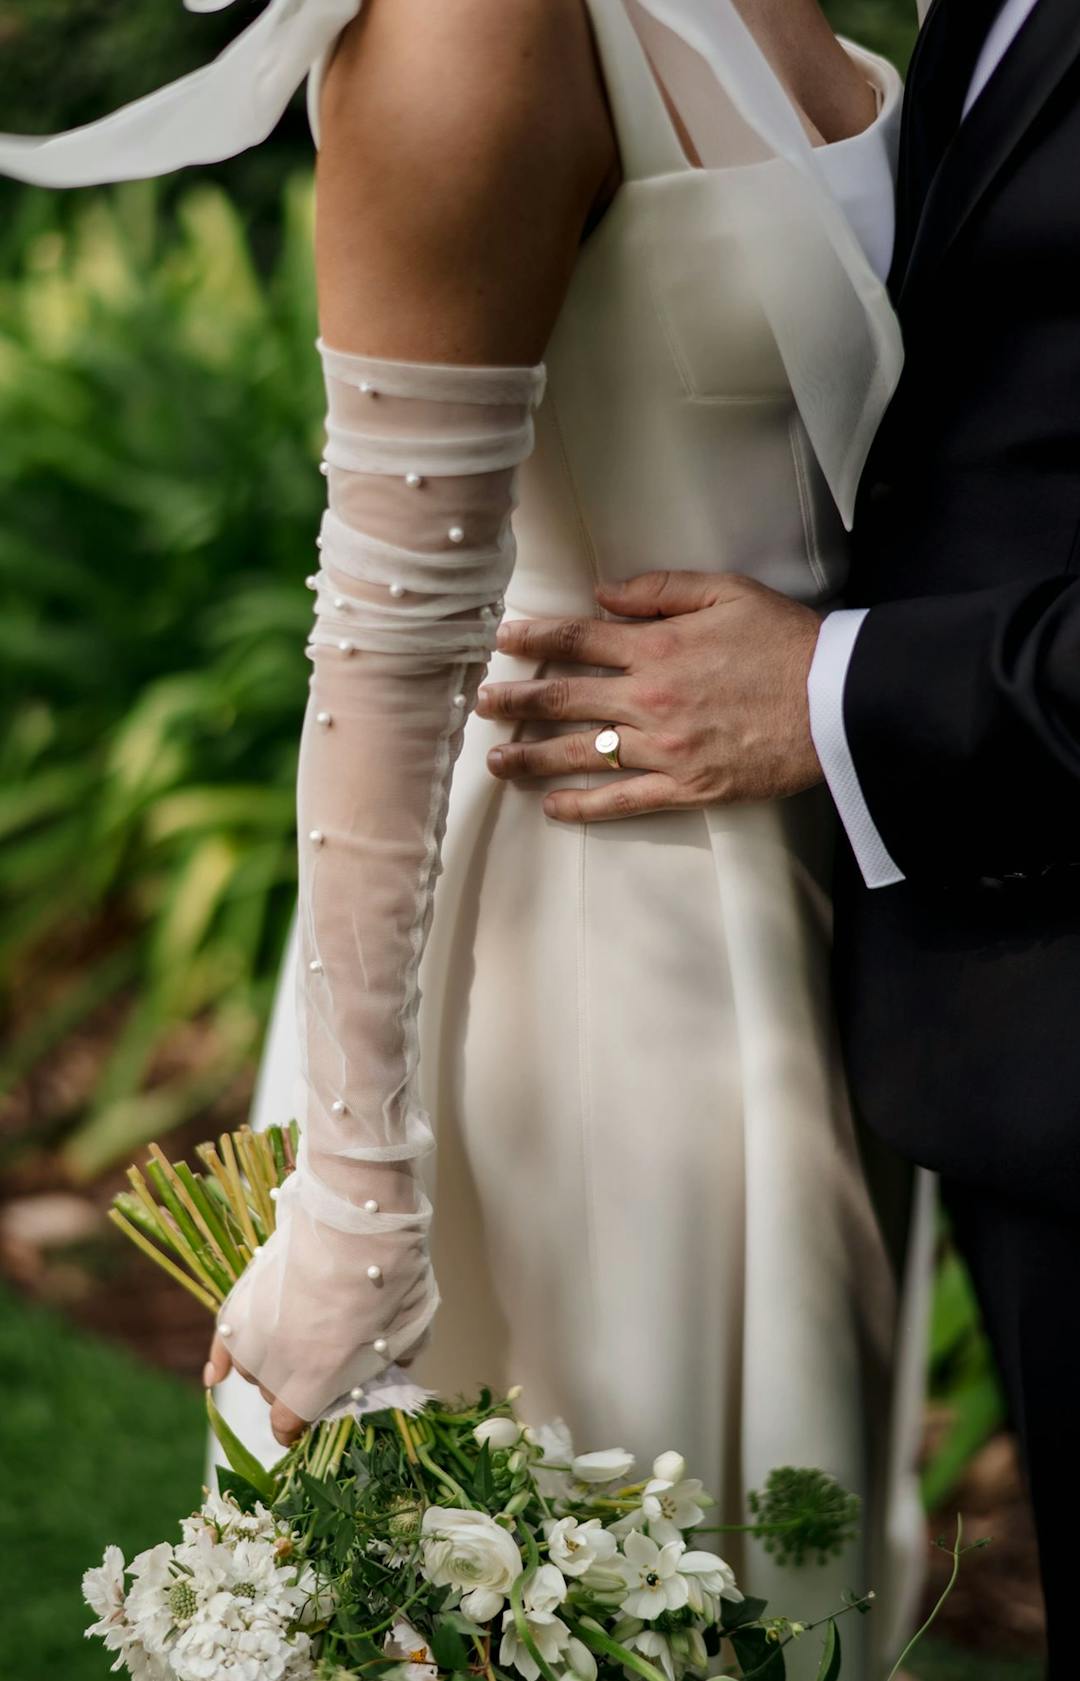 Bride's dress and glove